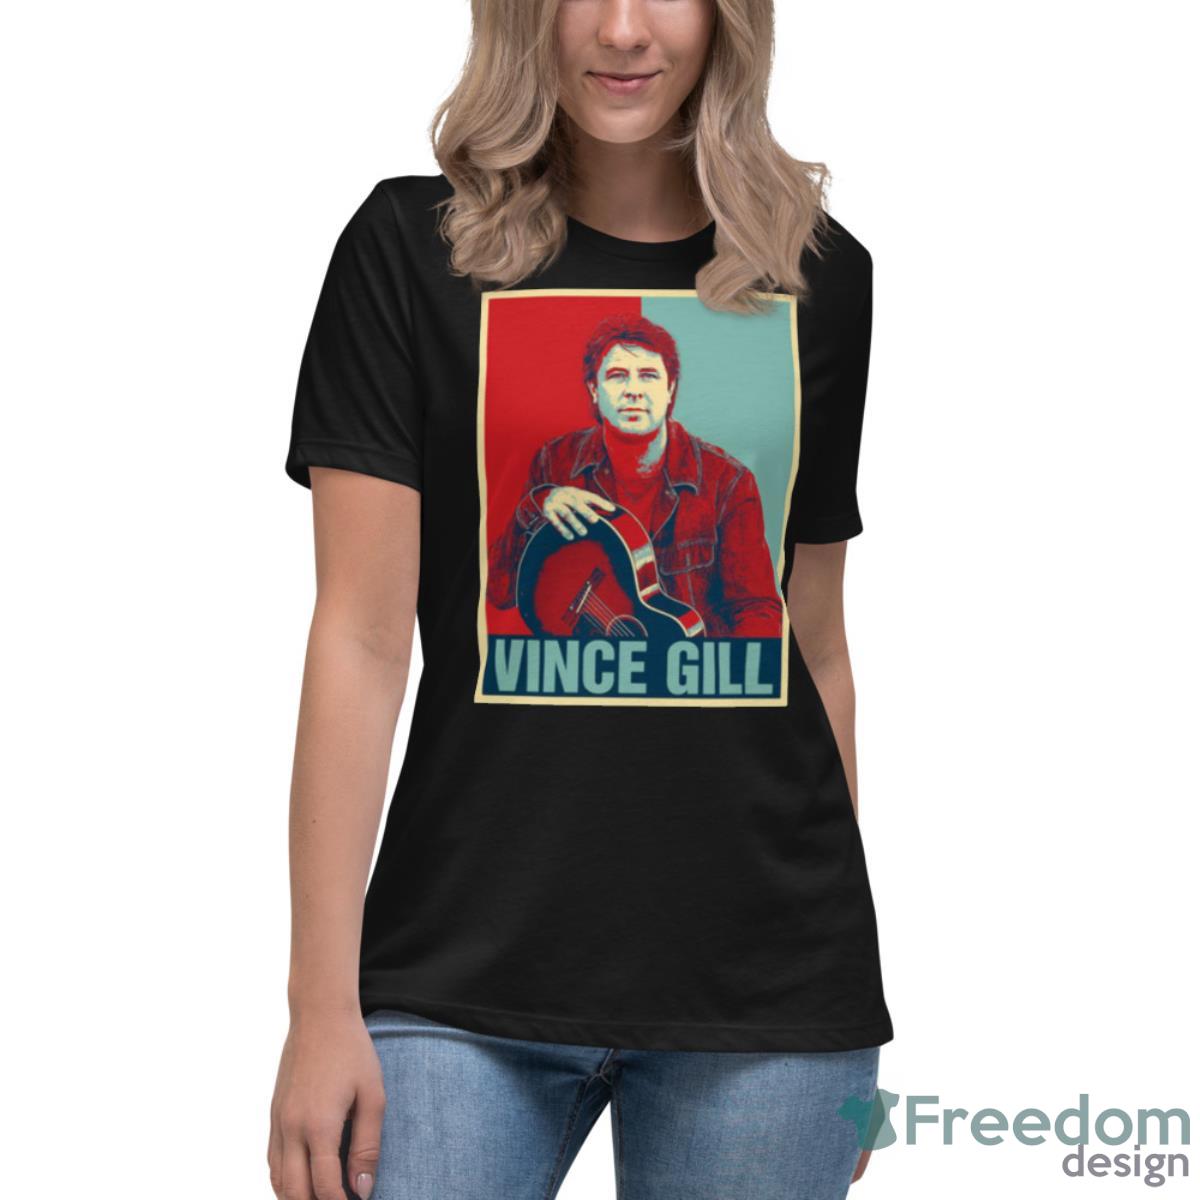 Most Important Style Vince Gill Shirt